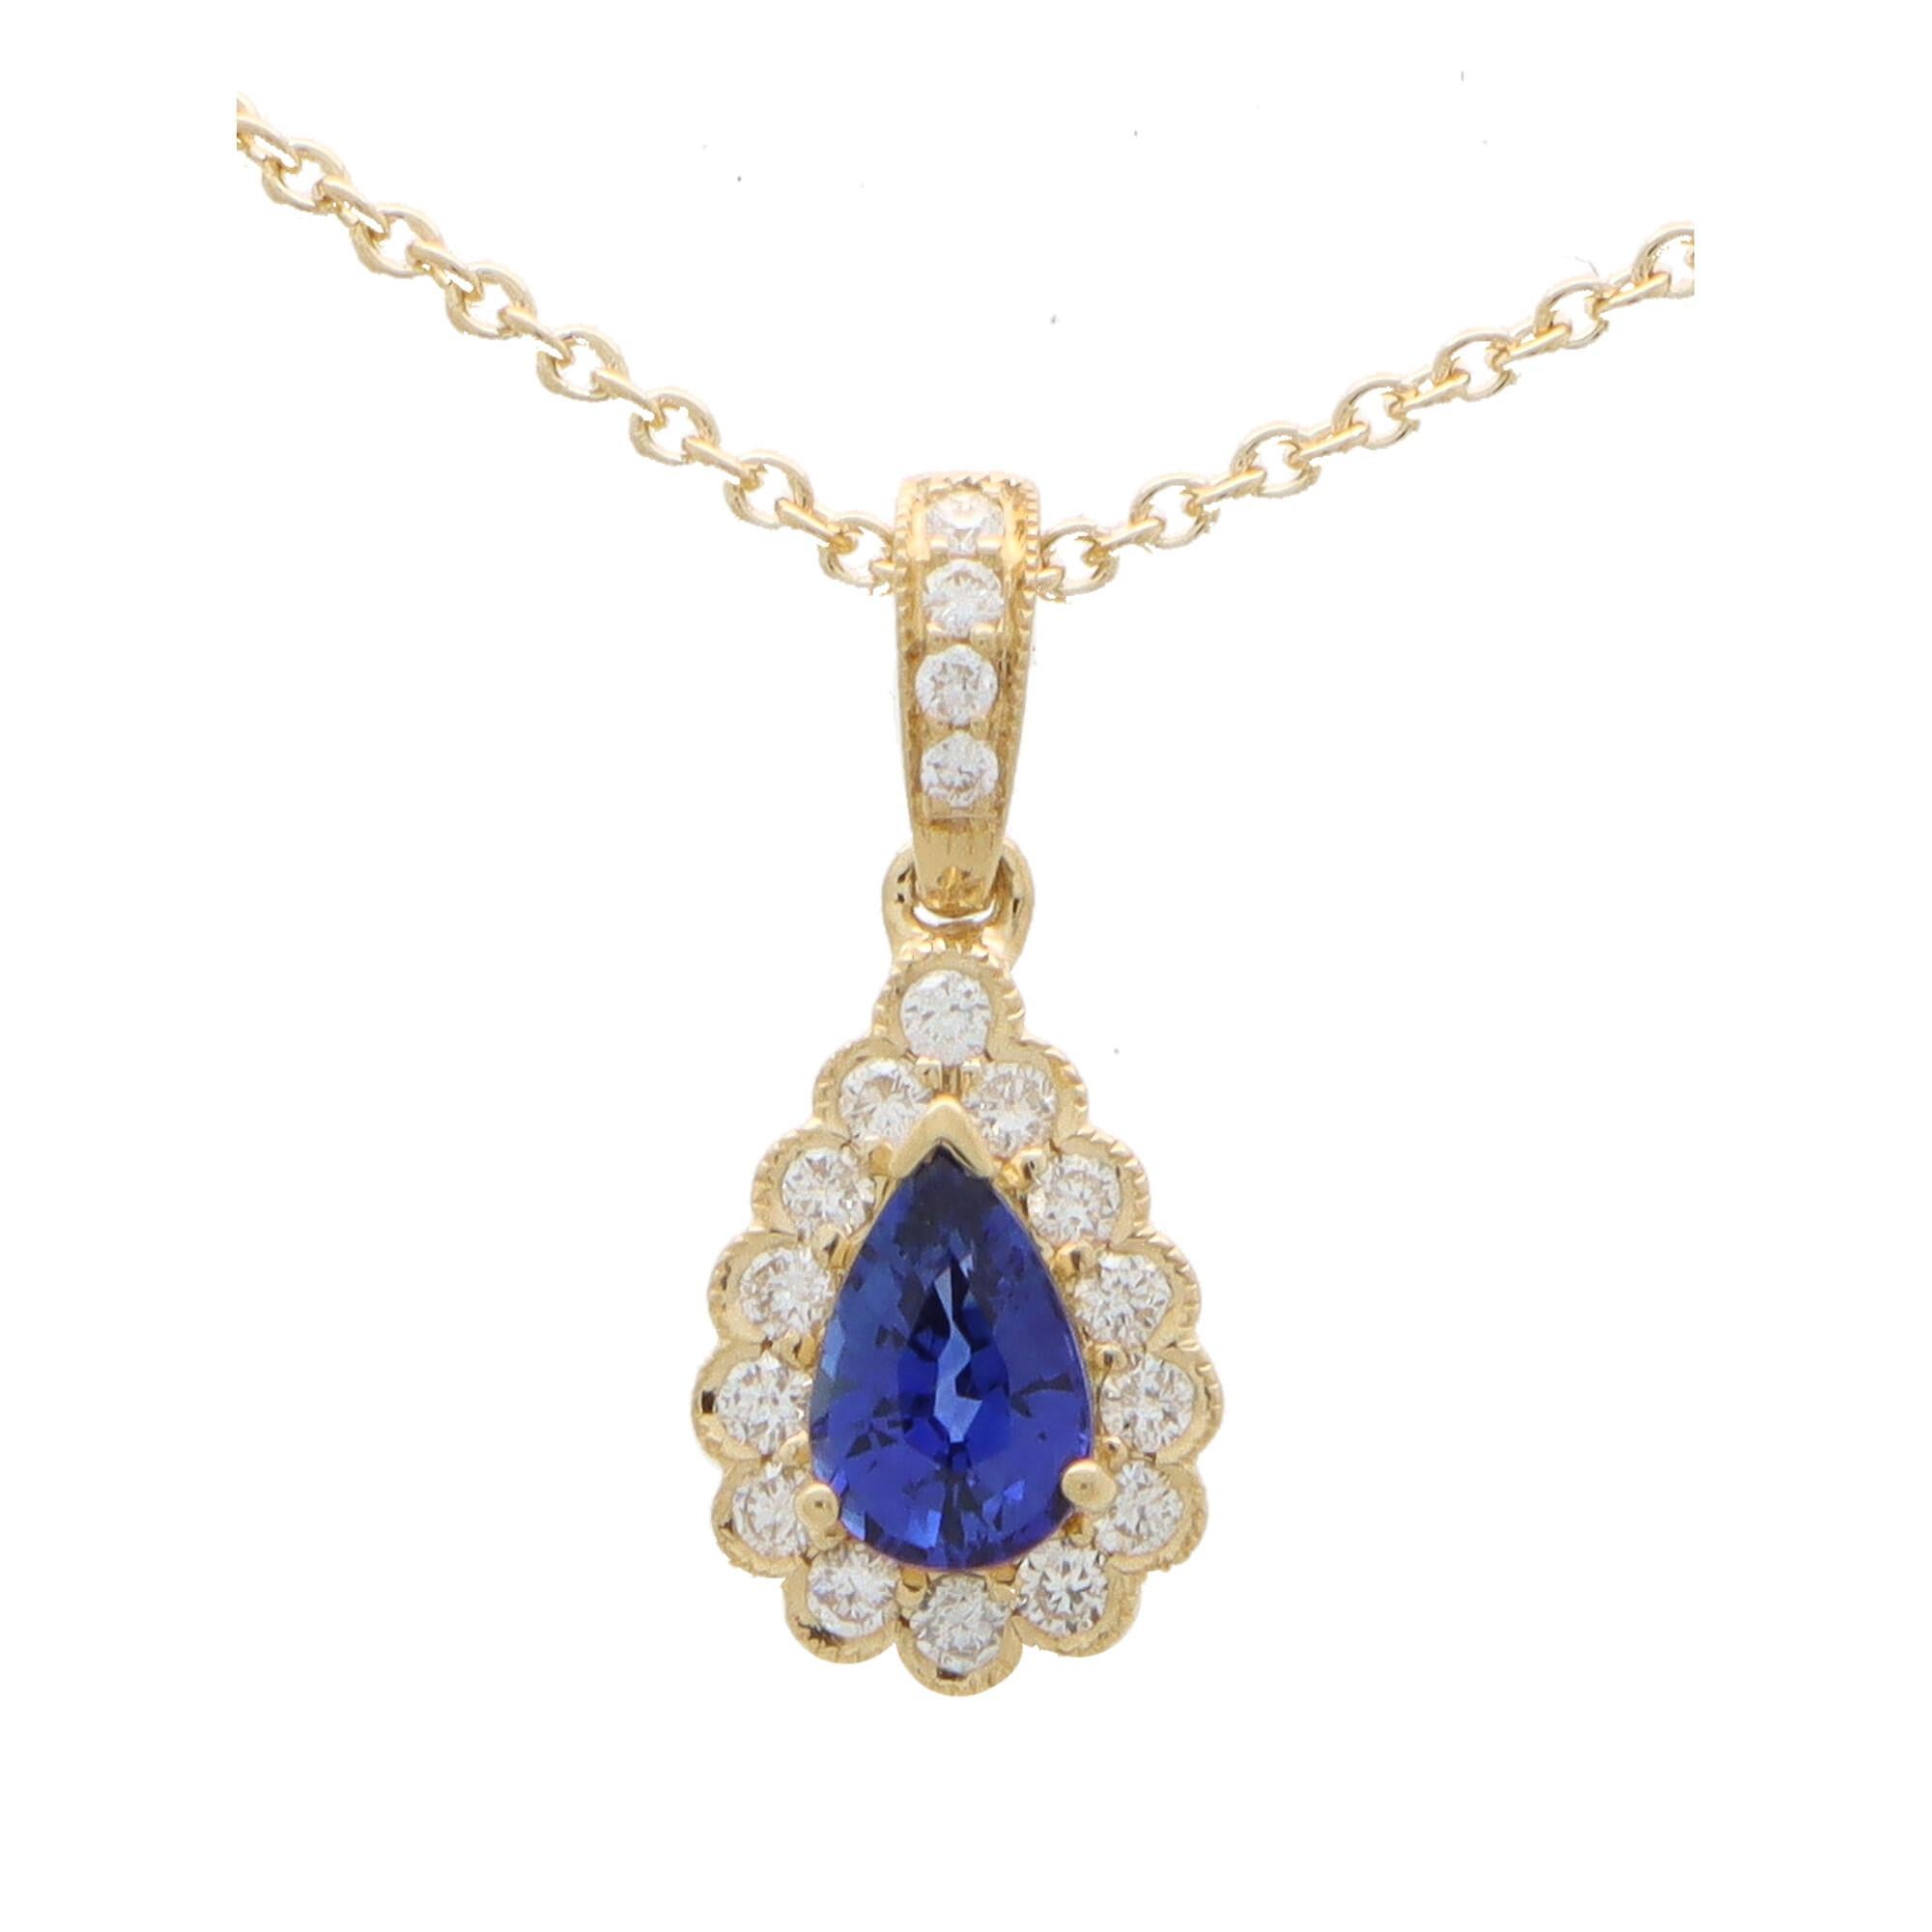 Modern Sapphire and Diamond Pear Shaped Pendant Necklace in 18k Yellow Gold